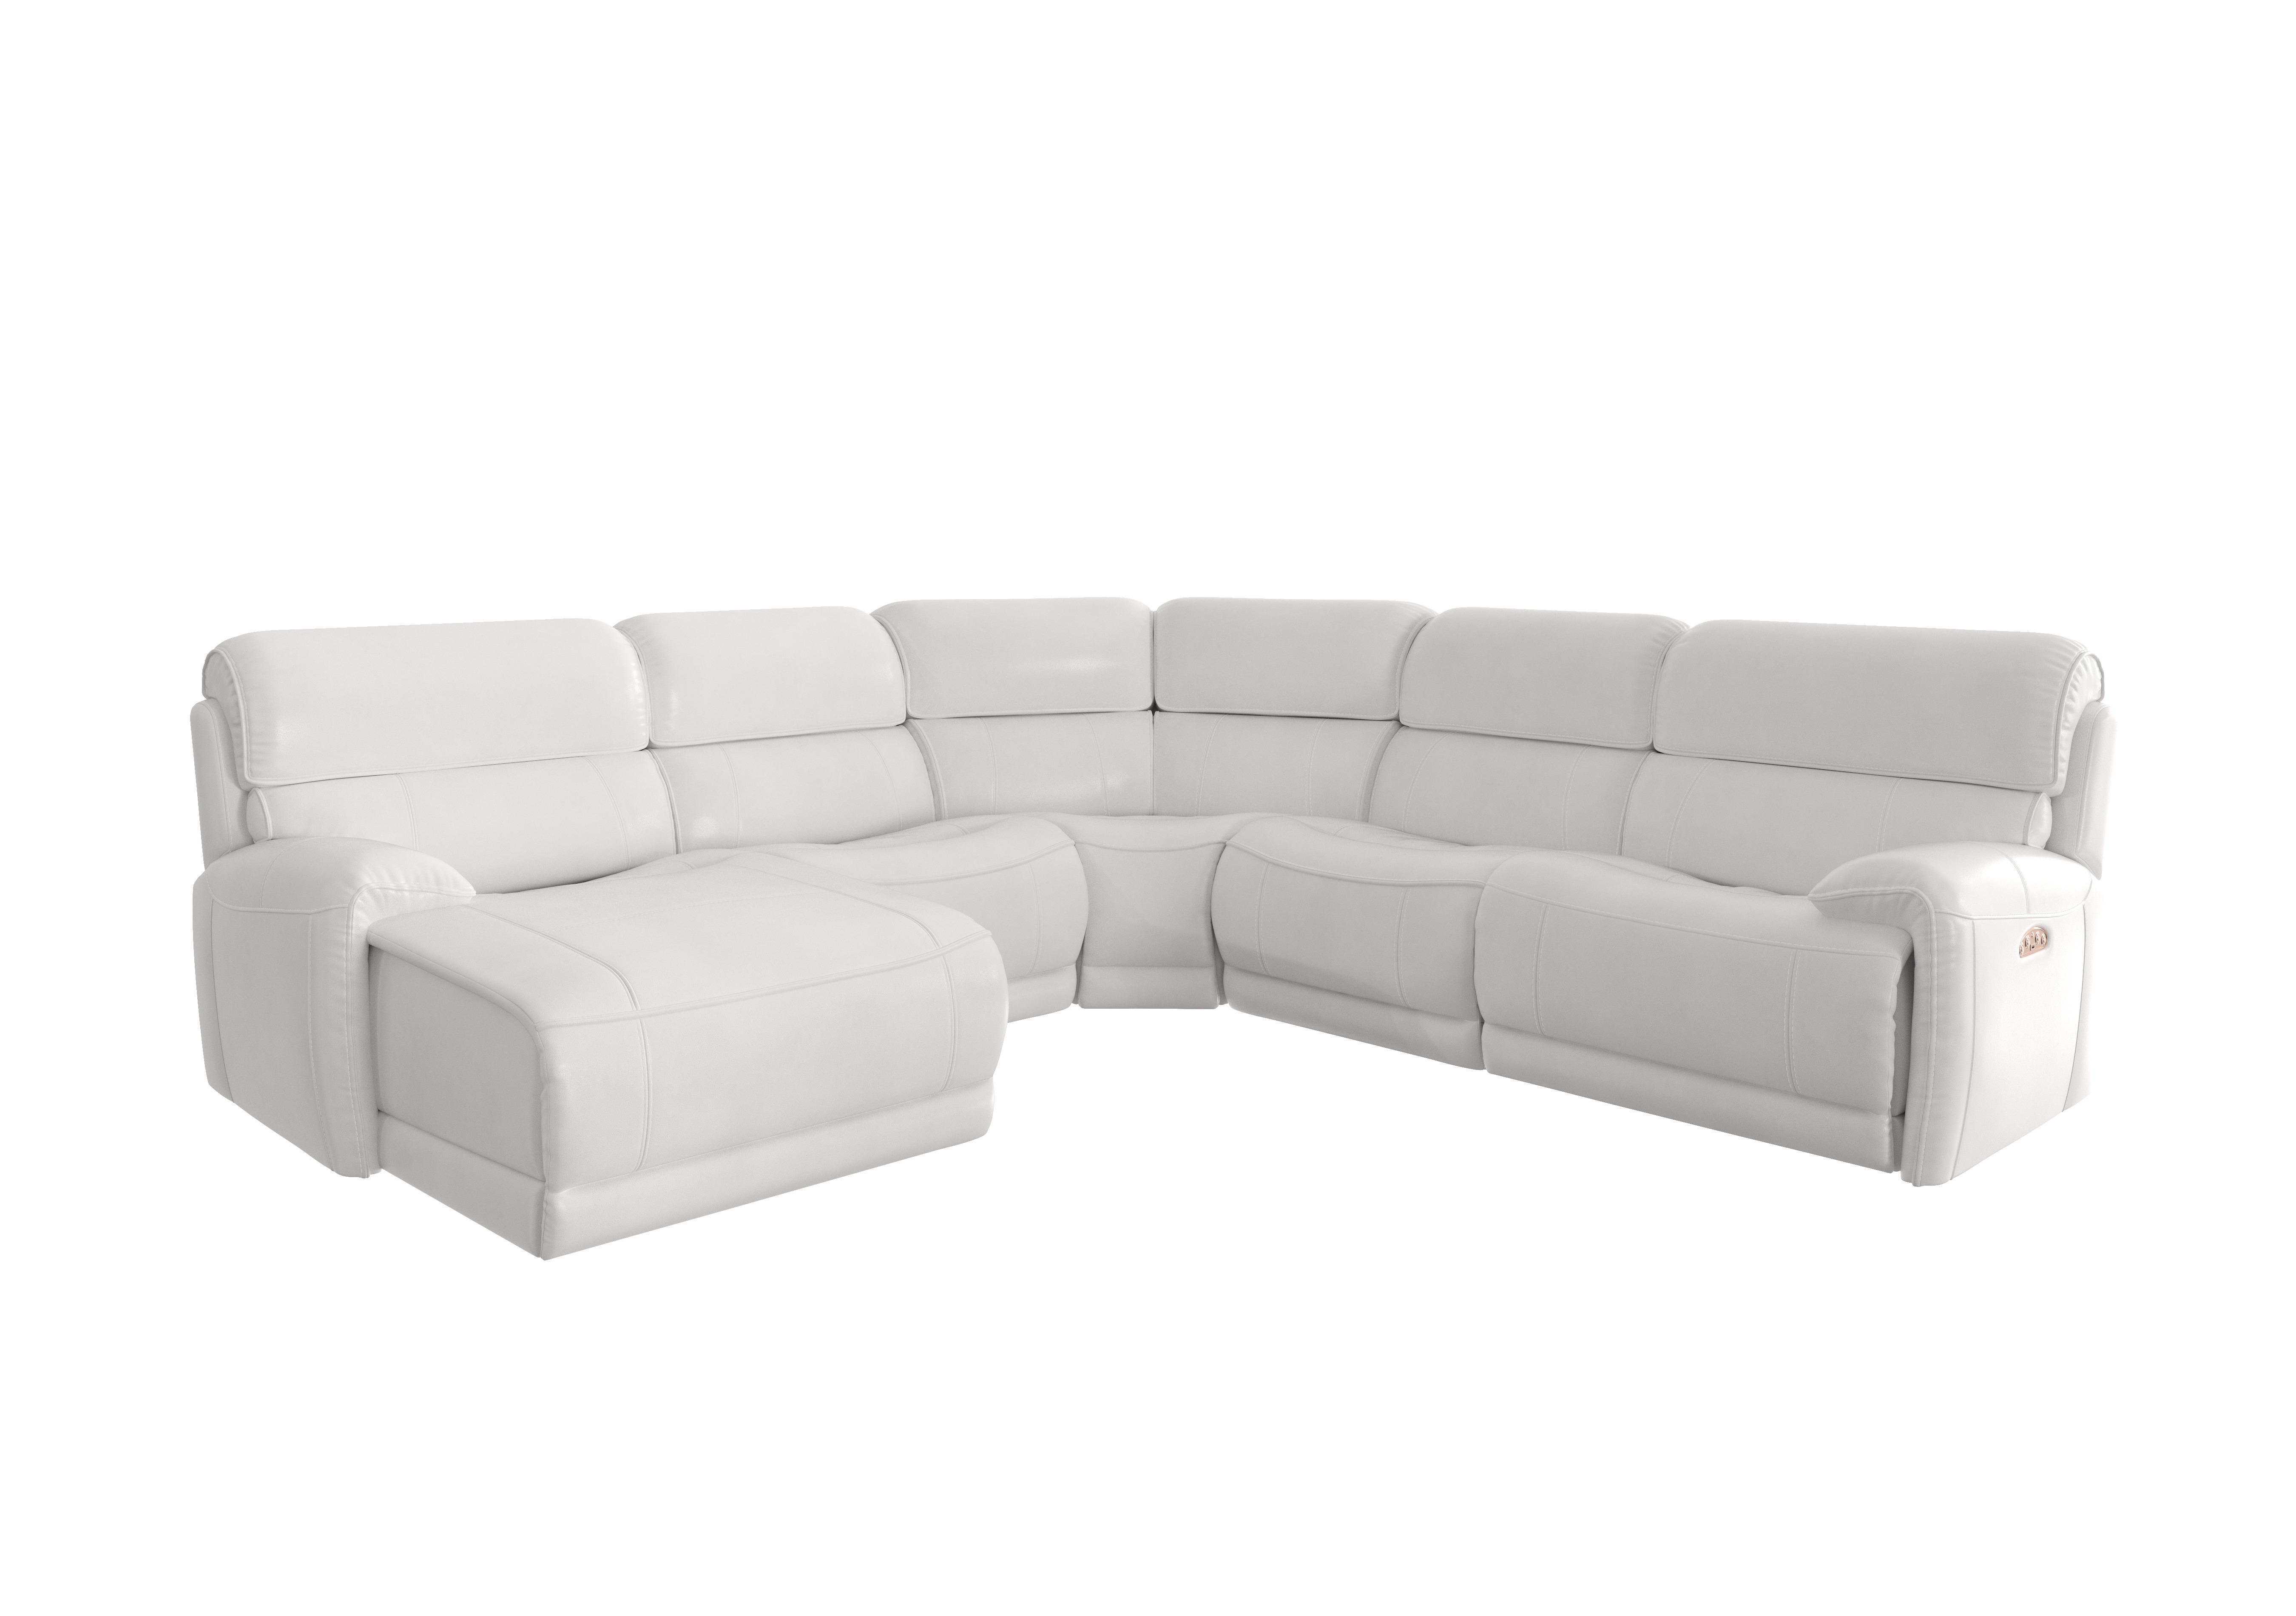 Link Leather Corner Chaise Power Sofa in Bv-744d Star White on Furniture Village